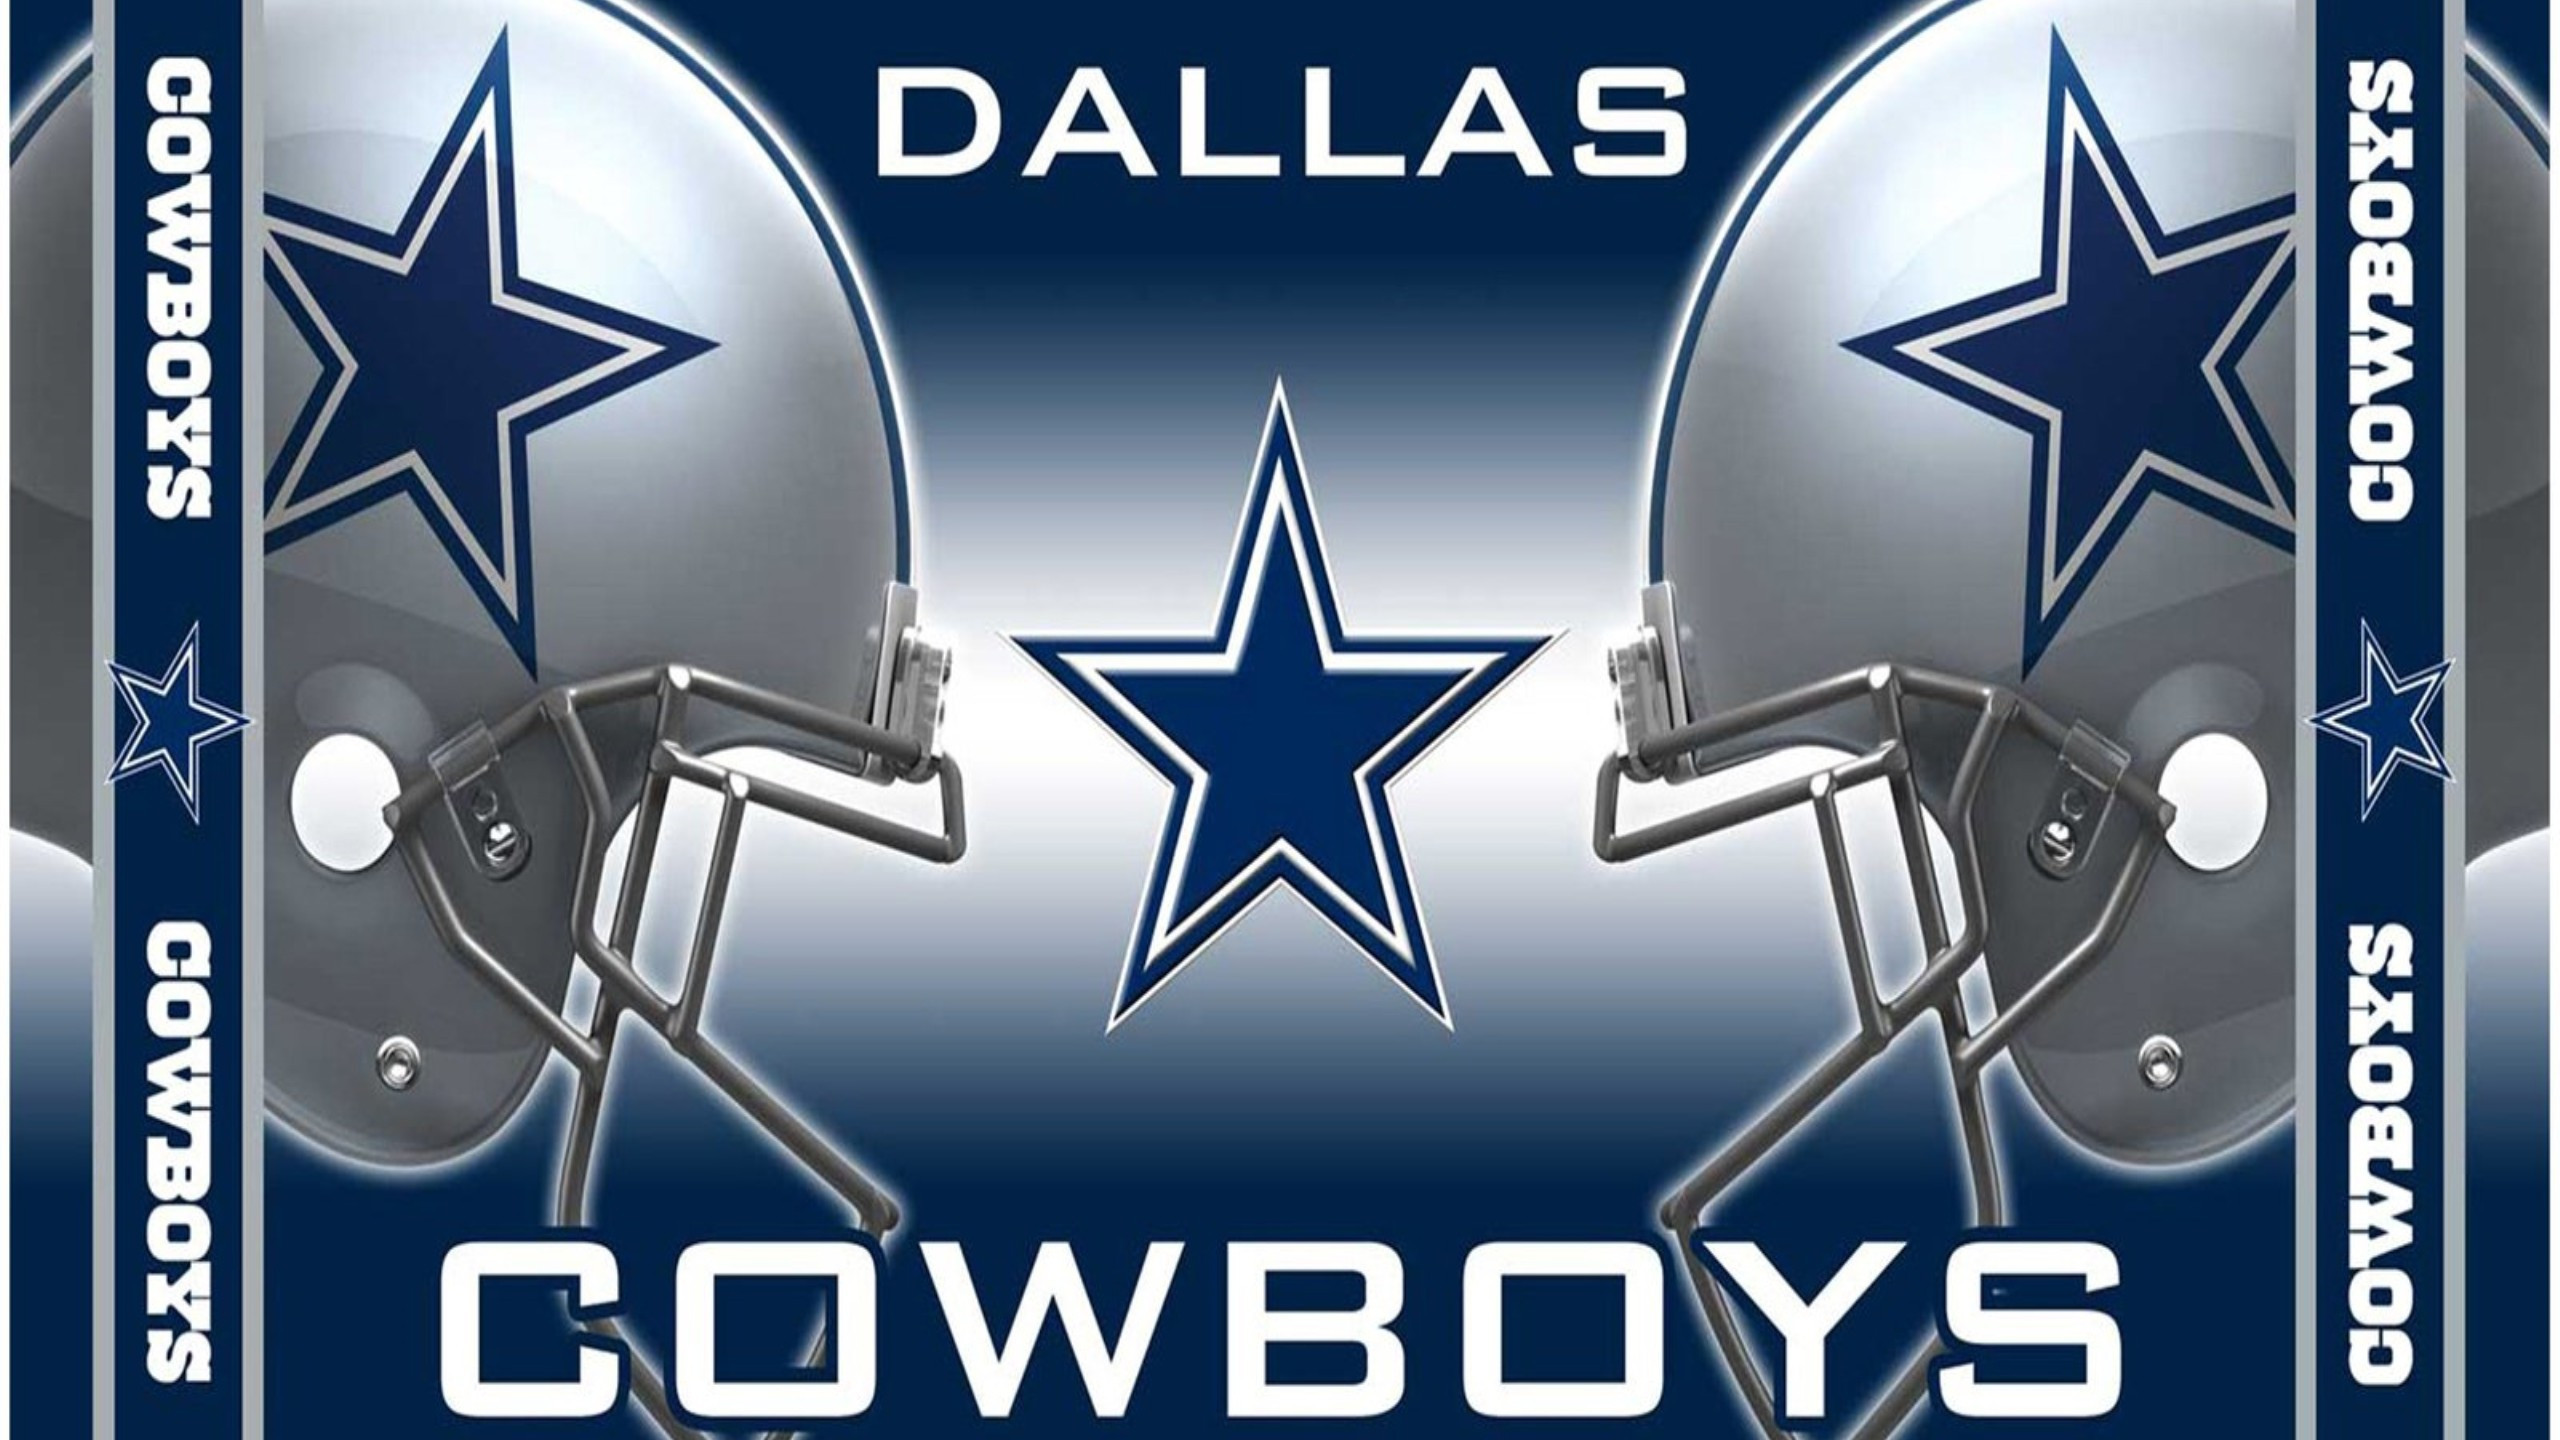 2560x1440 Dallas Cowboys Room Wallpaper Awesome Dallas Cowboys Wallpapers S  Backgrounds